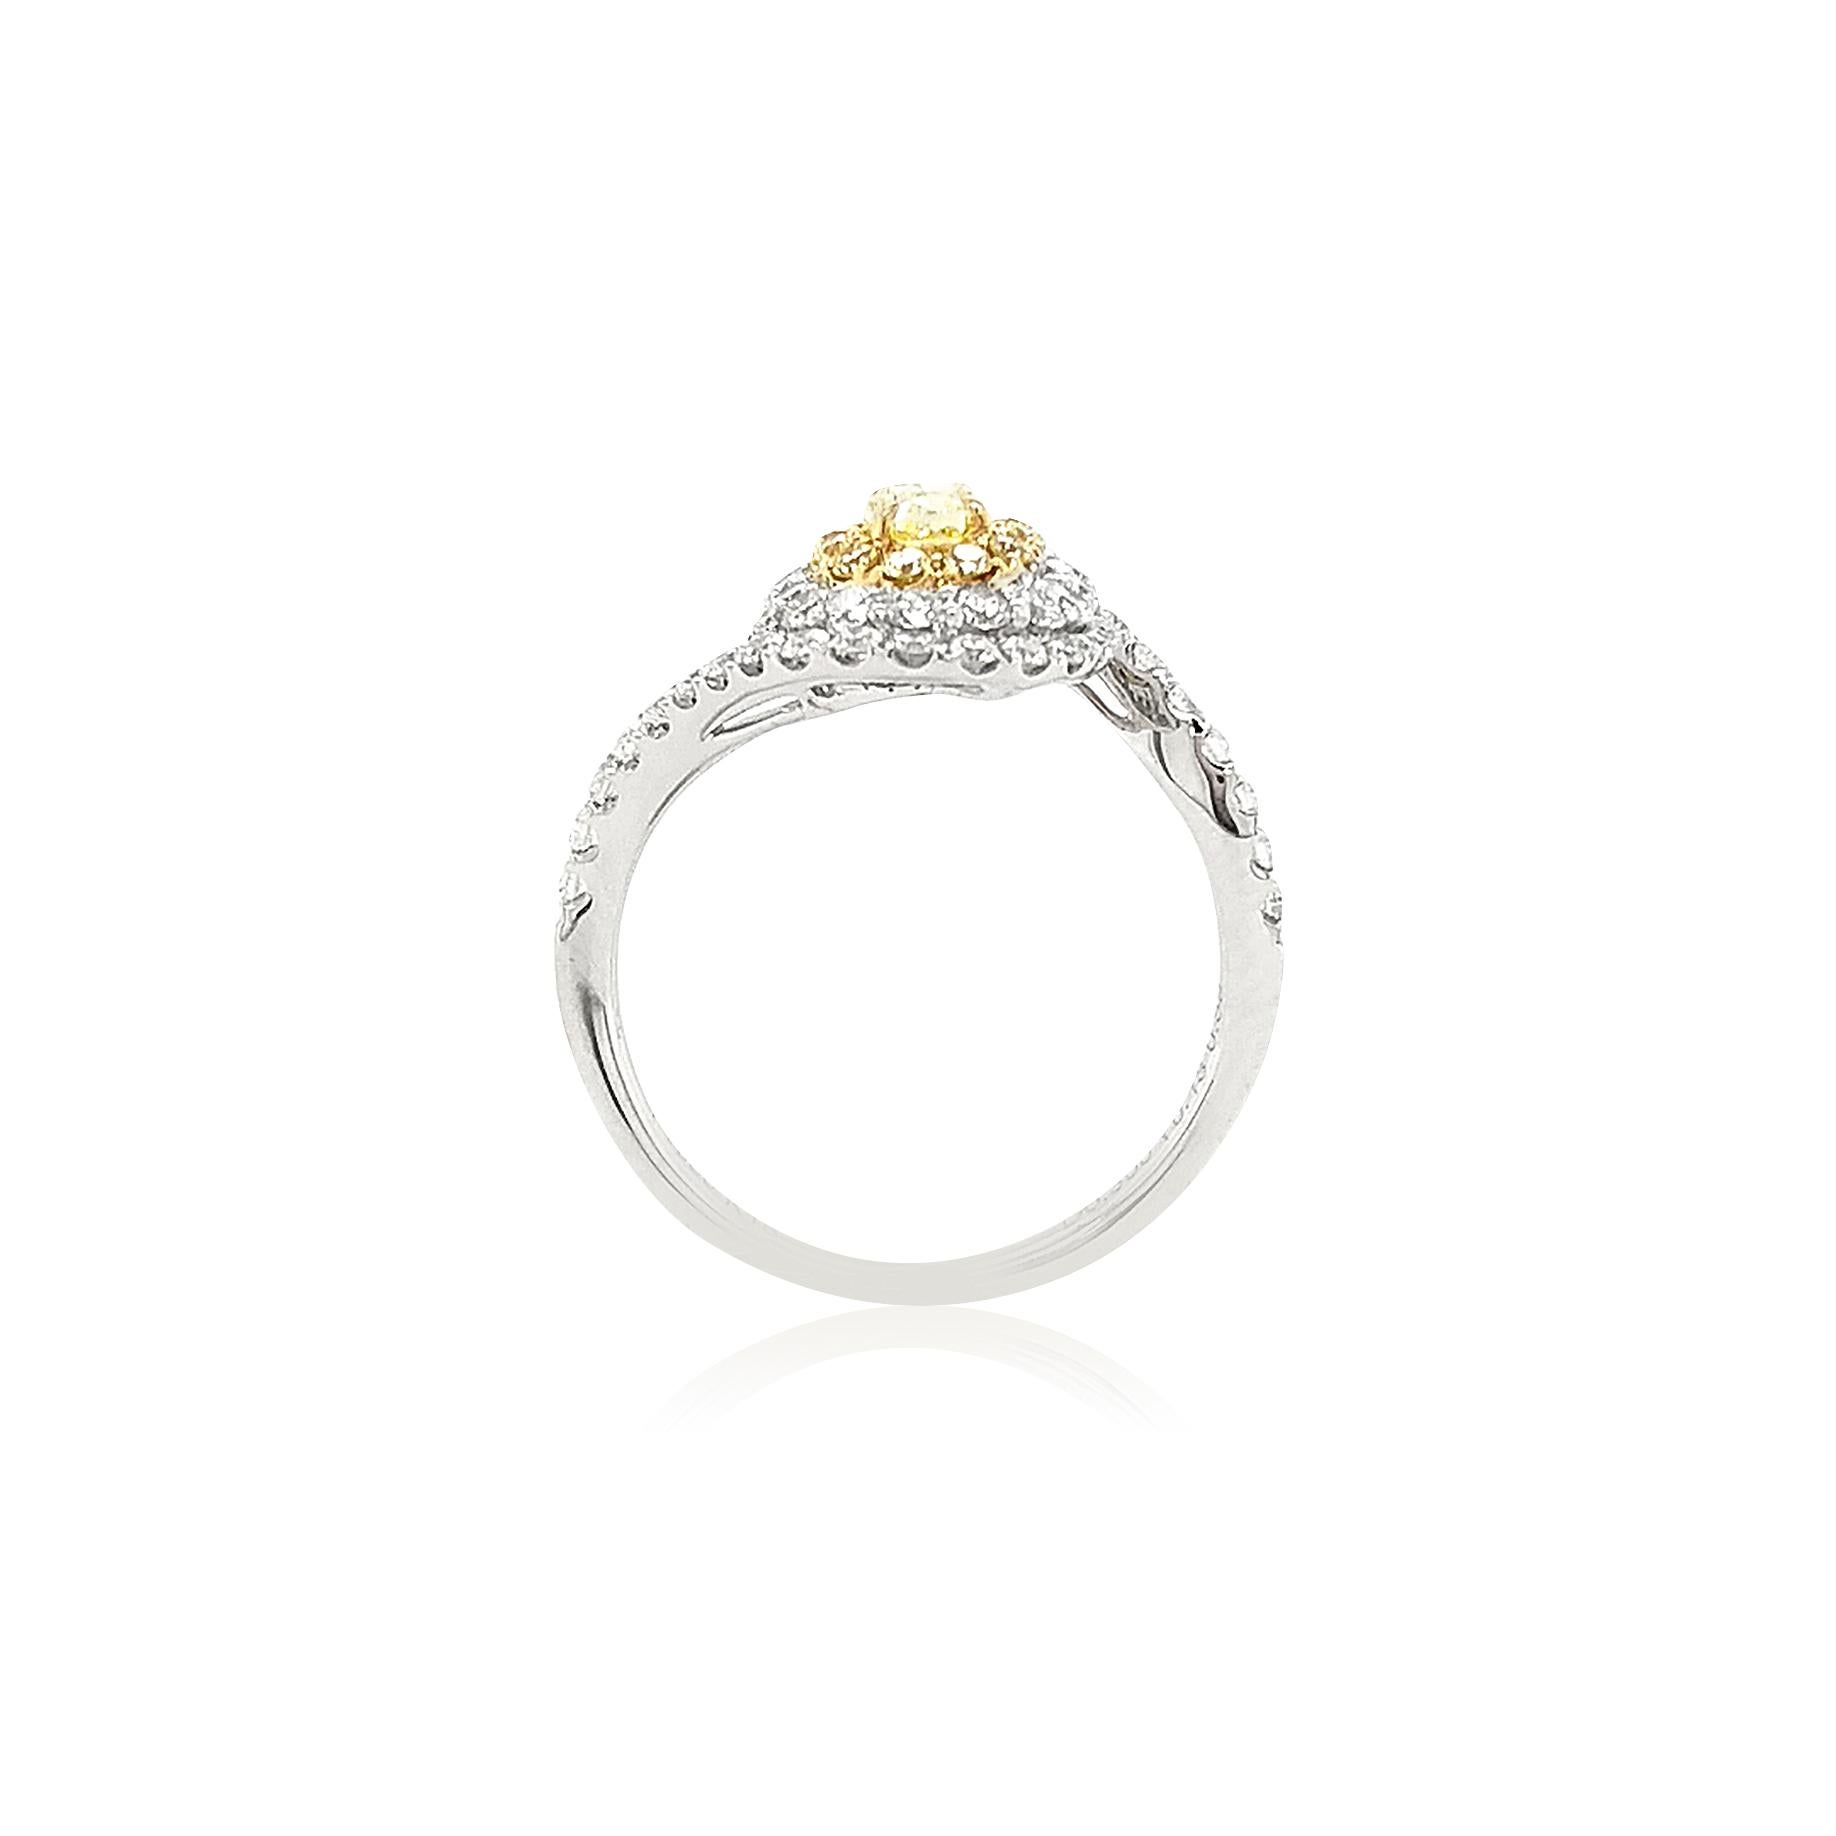 Contemporary Certified Fancy Yellow Diamond and White Diamond in Platinum Wedding Ring